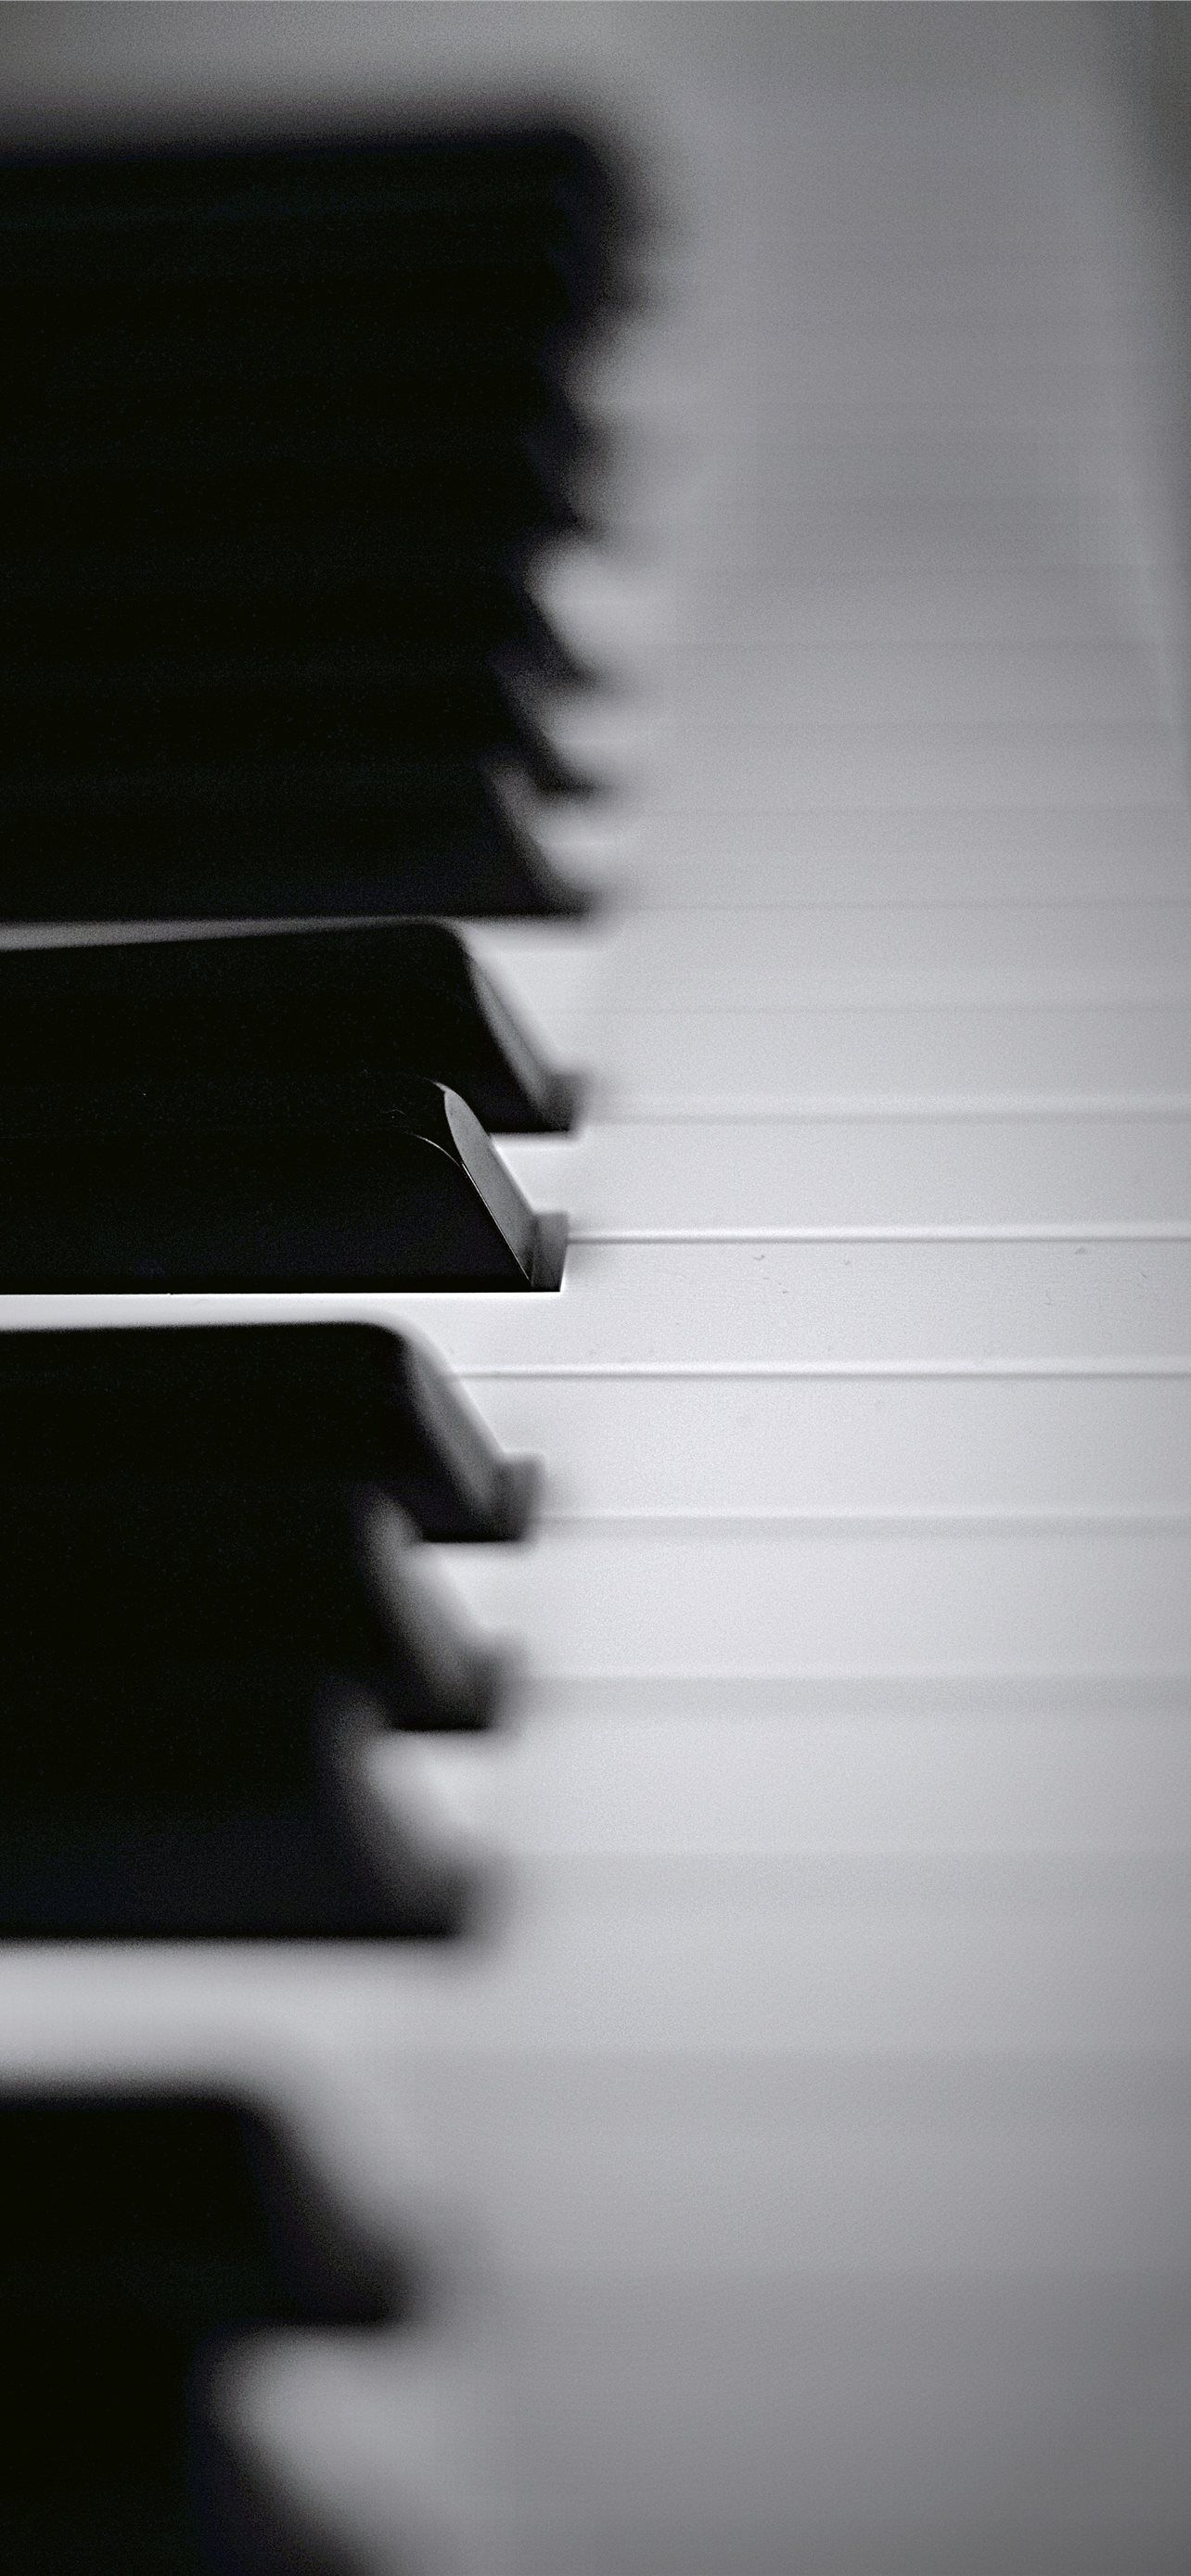 Cool Piano Keys on Dog iPhone Wallpaper Free Download